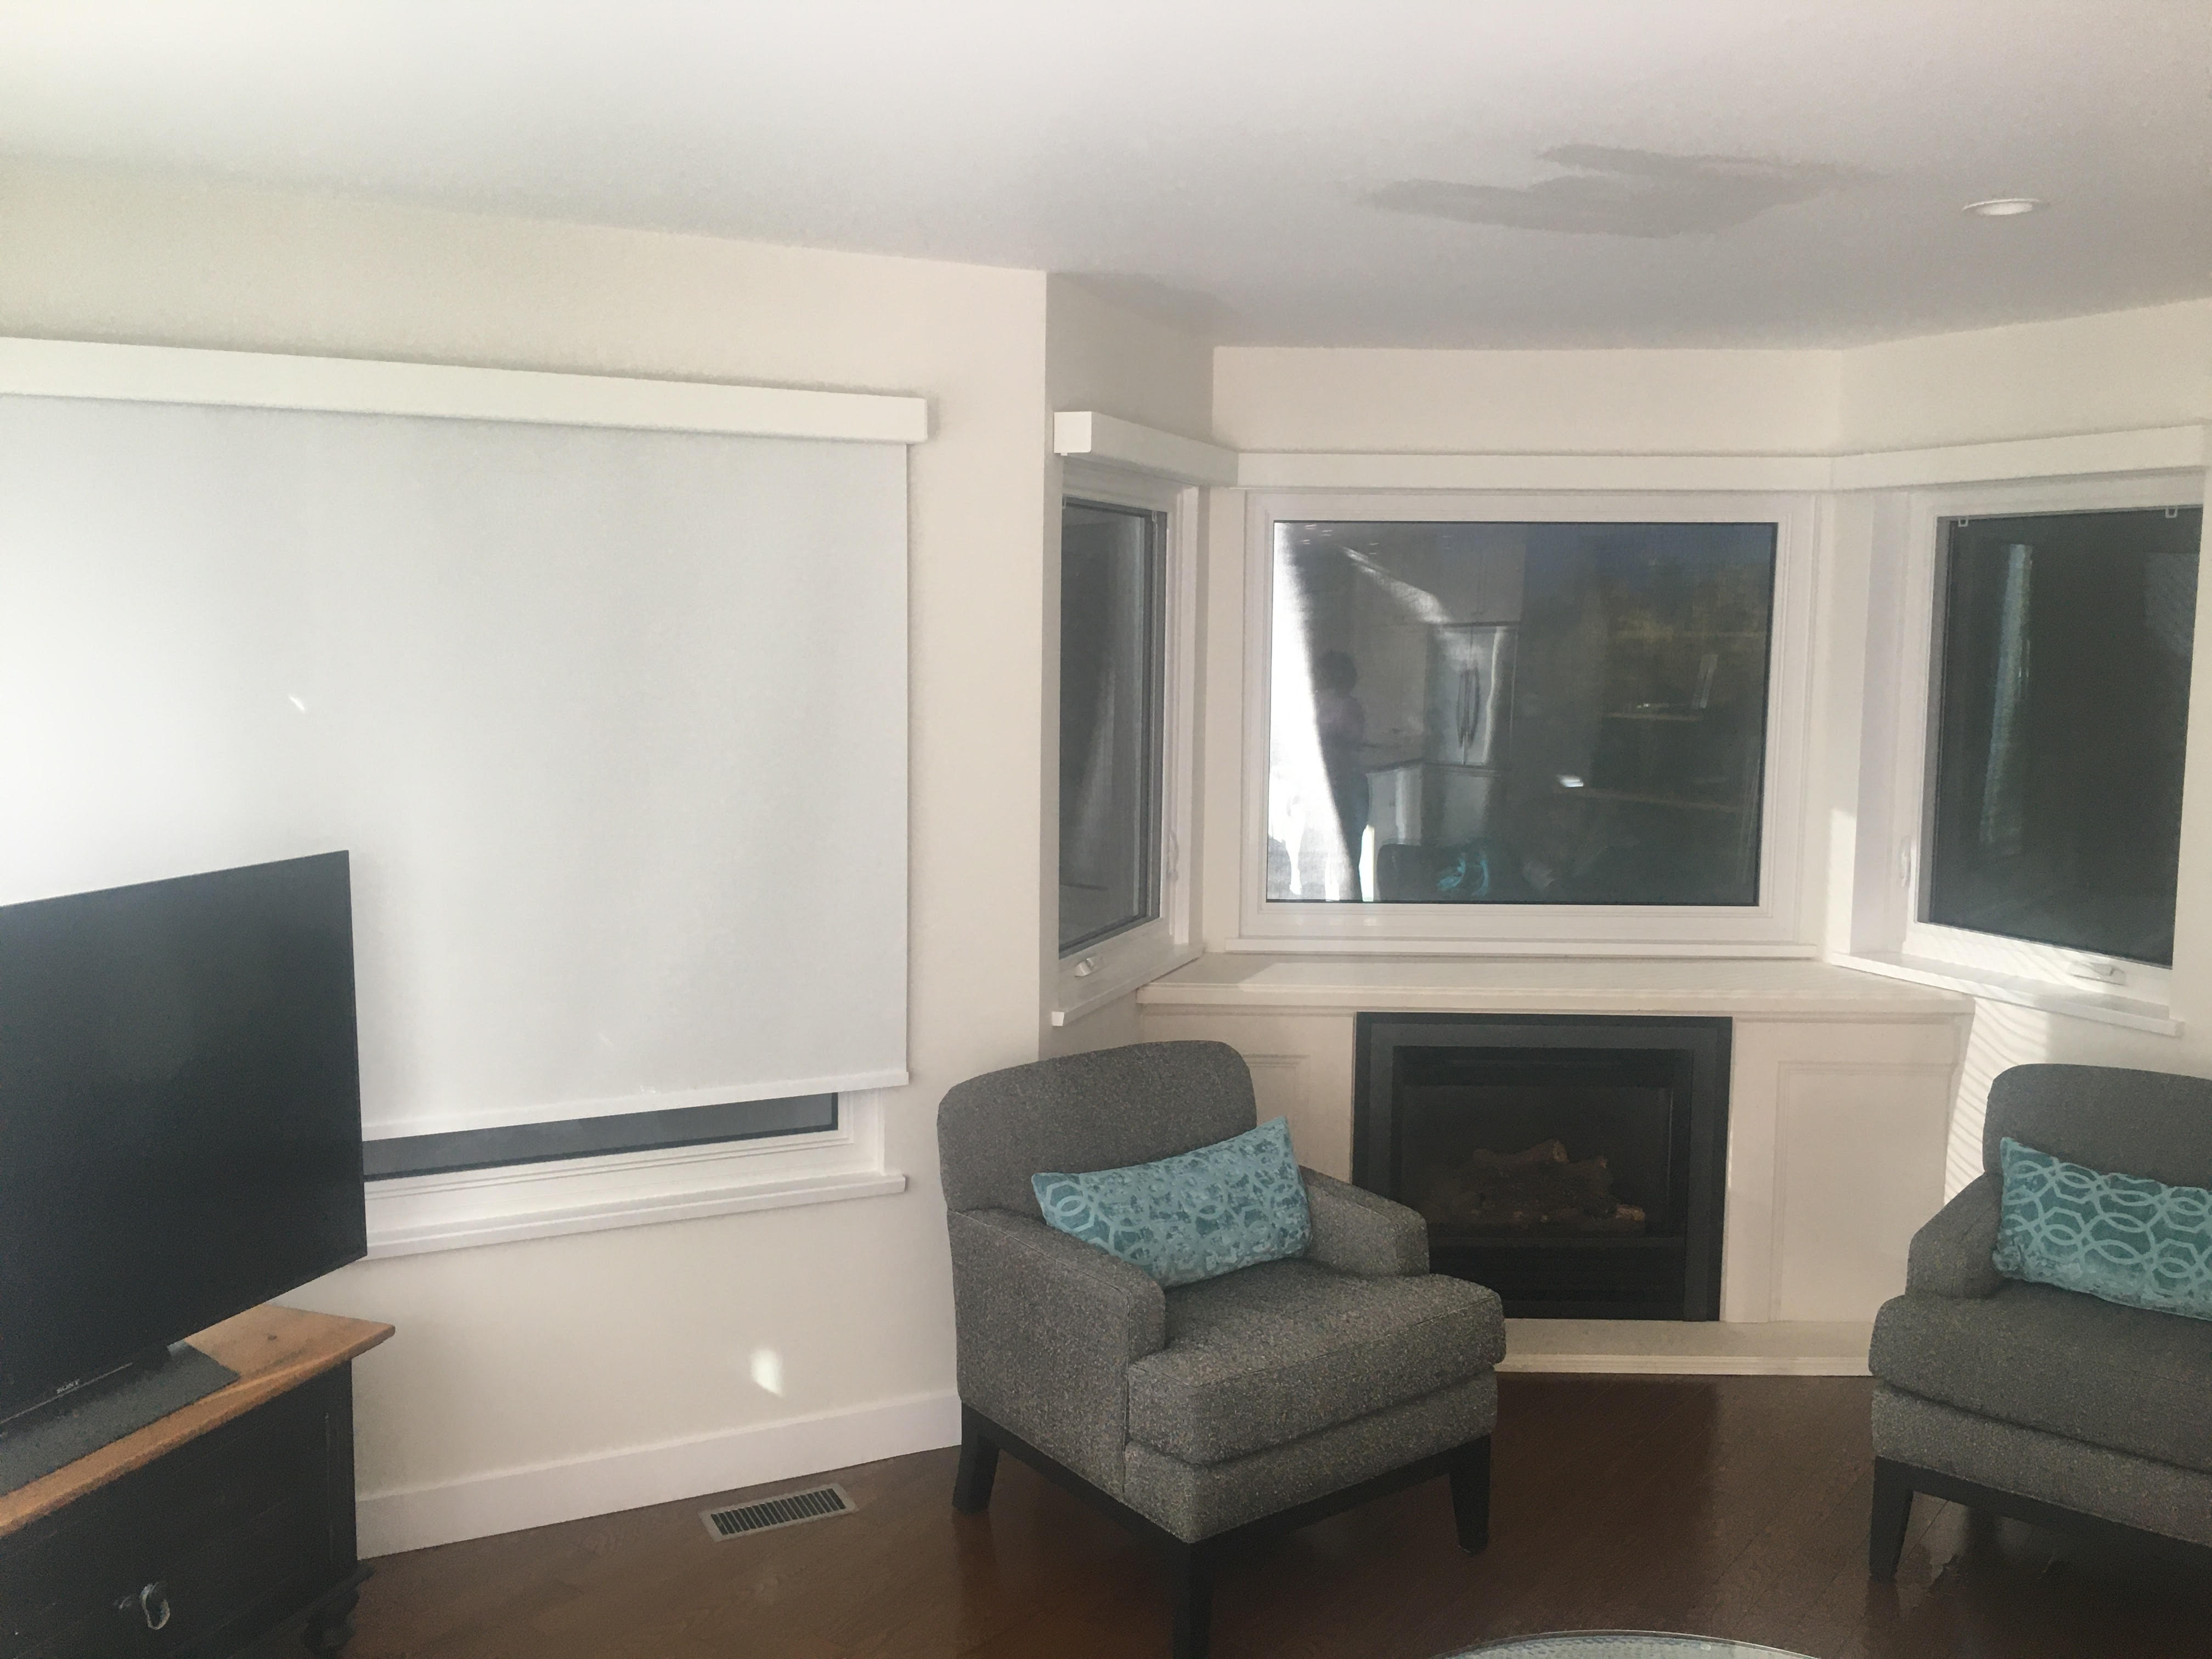 Budget Blinds of North & West Vancouver in North Vancouver